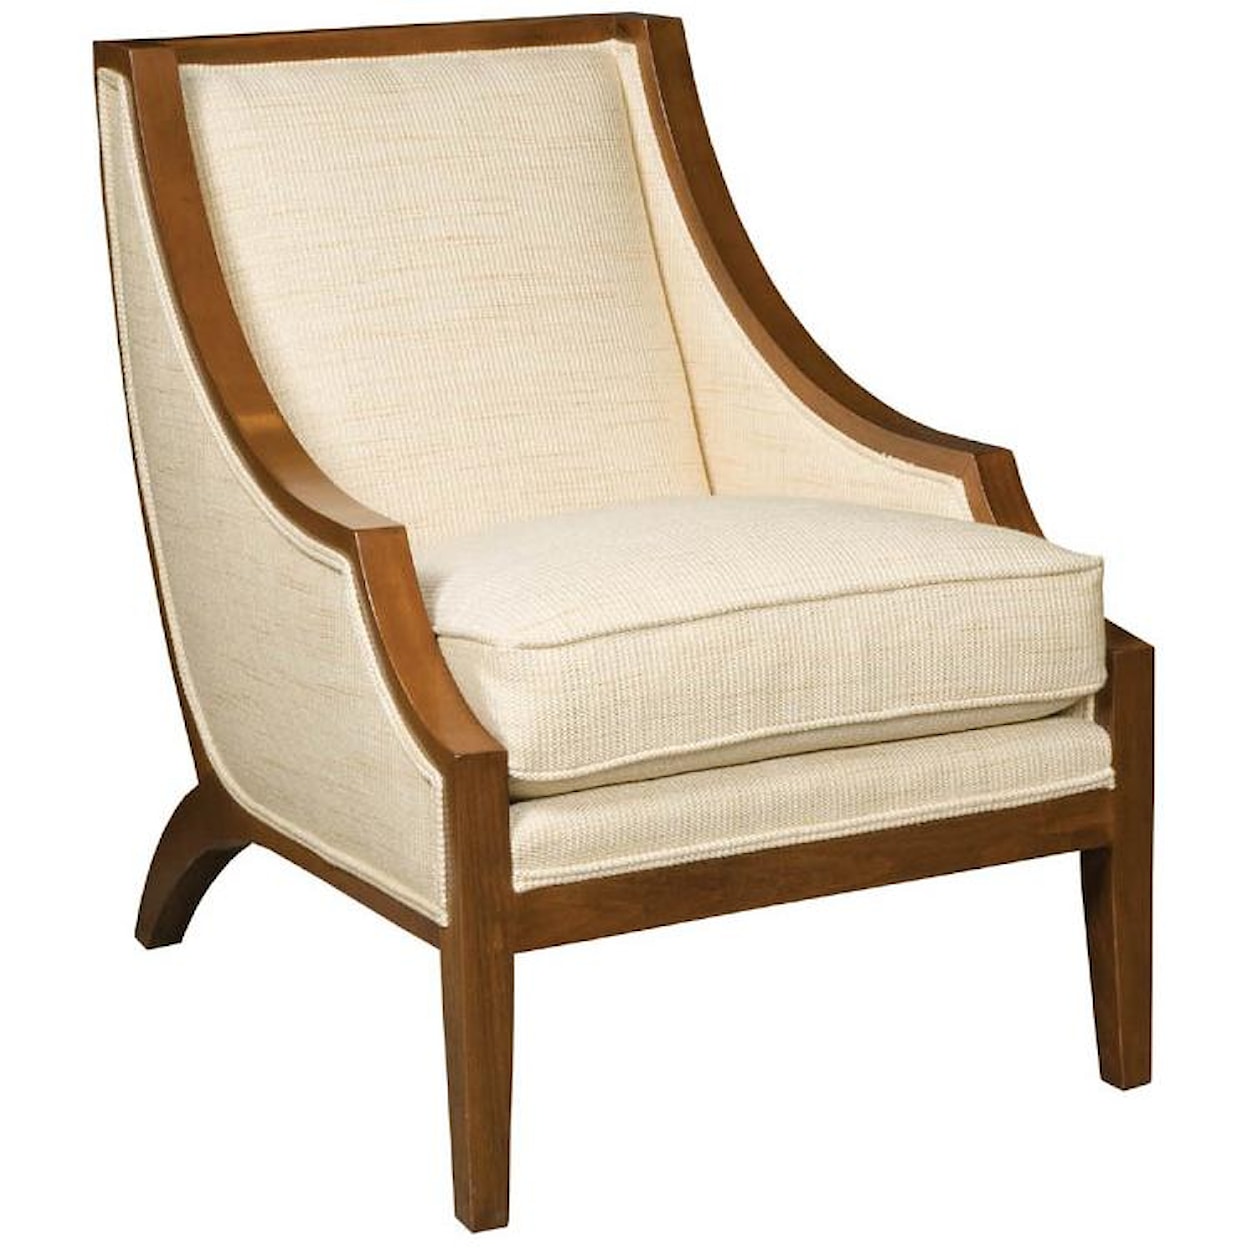 Vanguard Furniture Thom Filicia Home Collection Chair